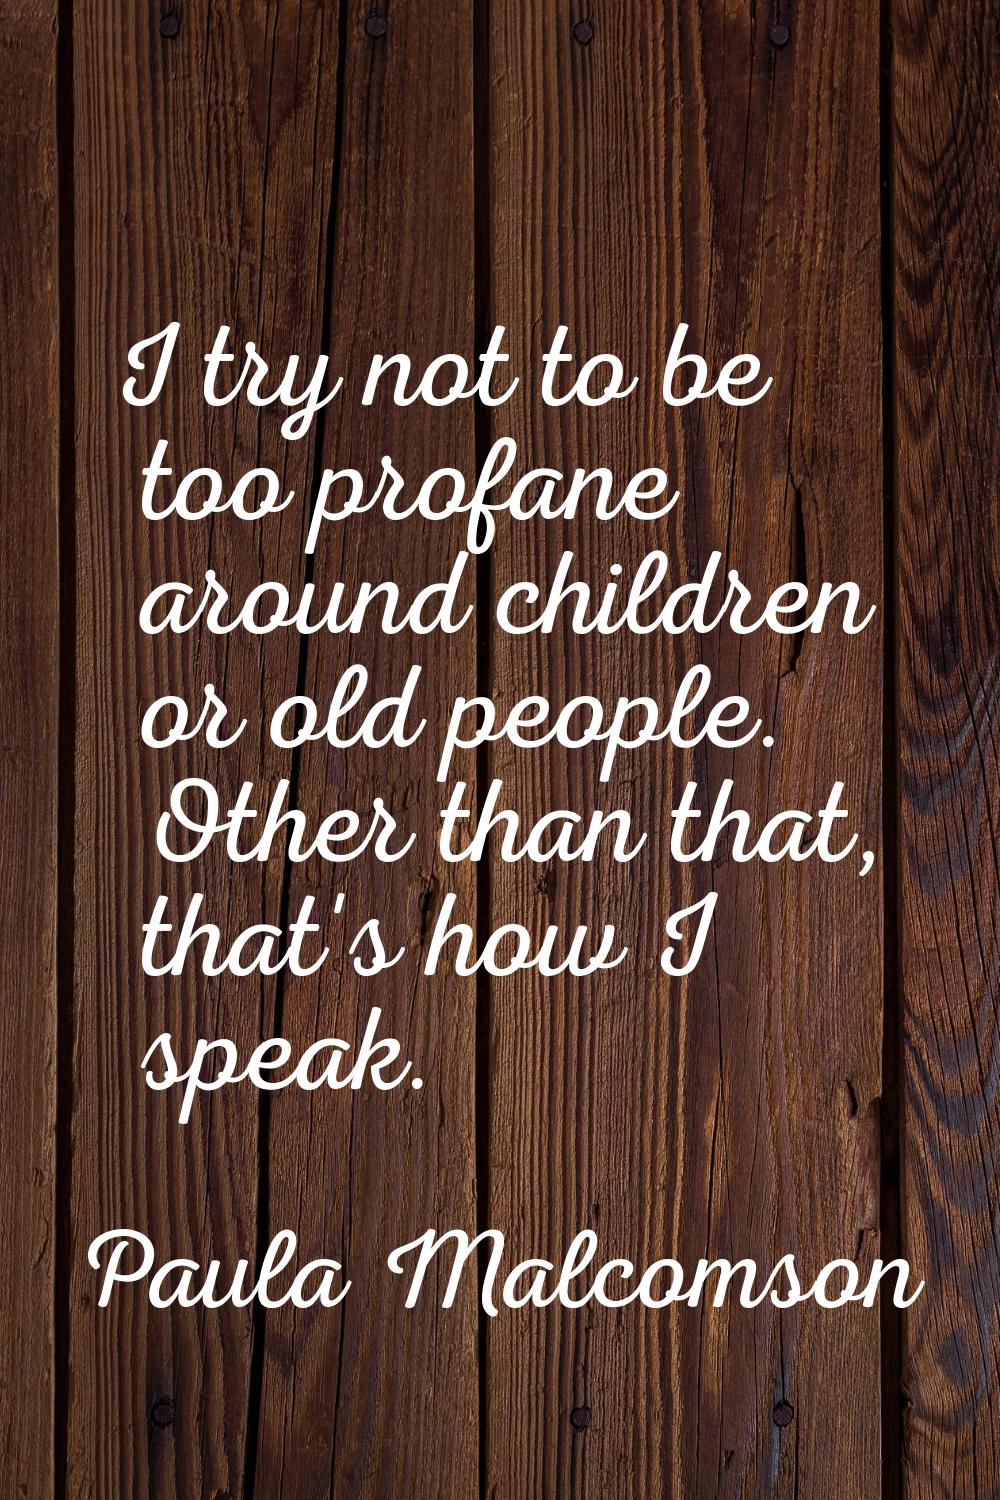 I try not to be too profane around children or old people. Other than that, that's how I speak.